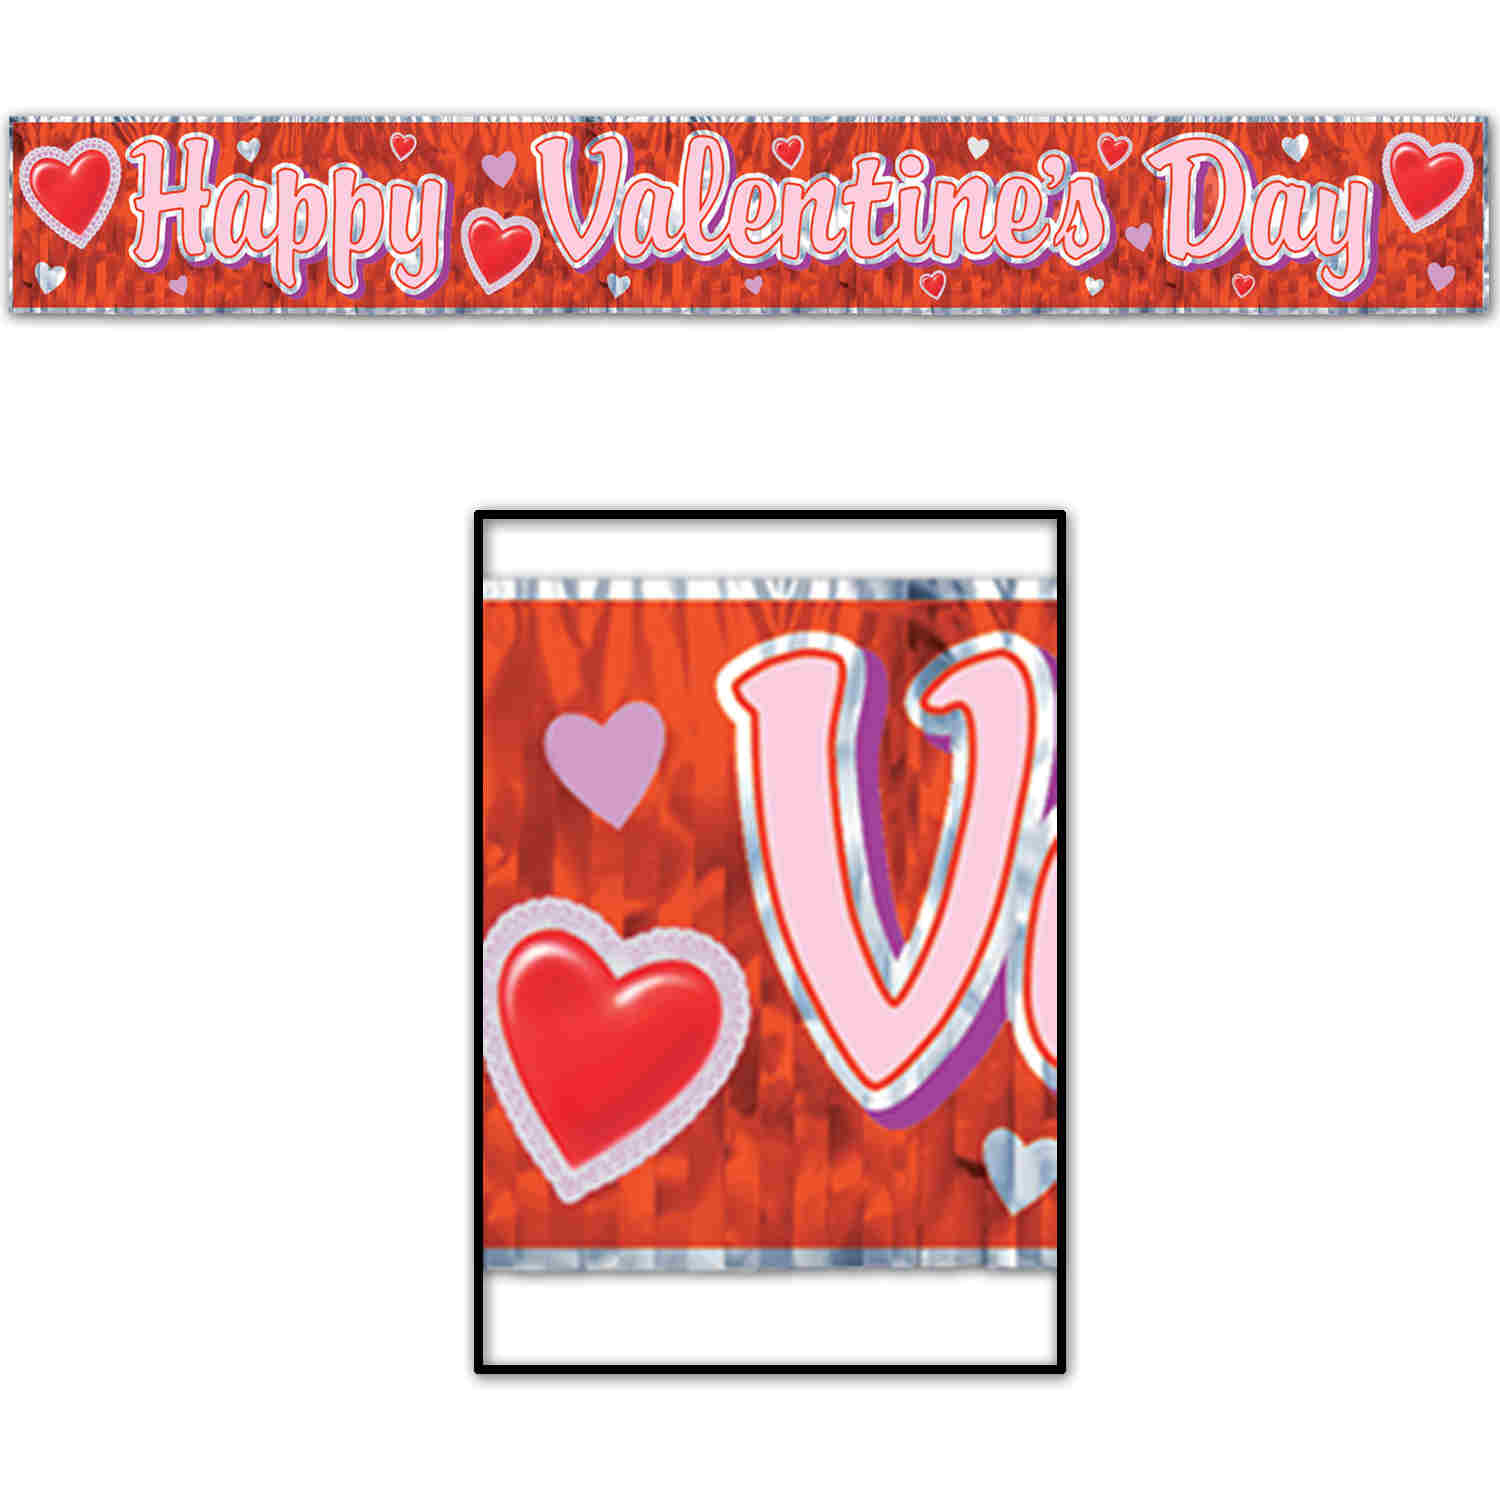 Happy Valentines Day Fringe Banner (Pack of 12) Happy Valentines Day Fringe Banner, valentines day, decoration, banner, wholesale, inexpensive, bulk